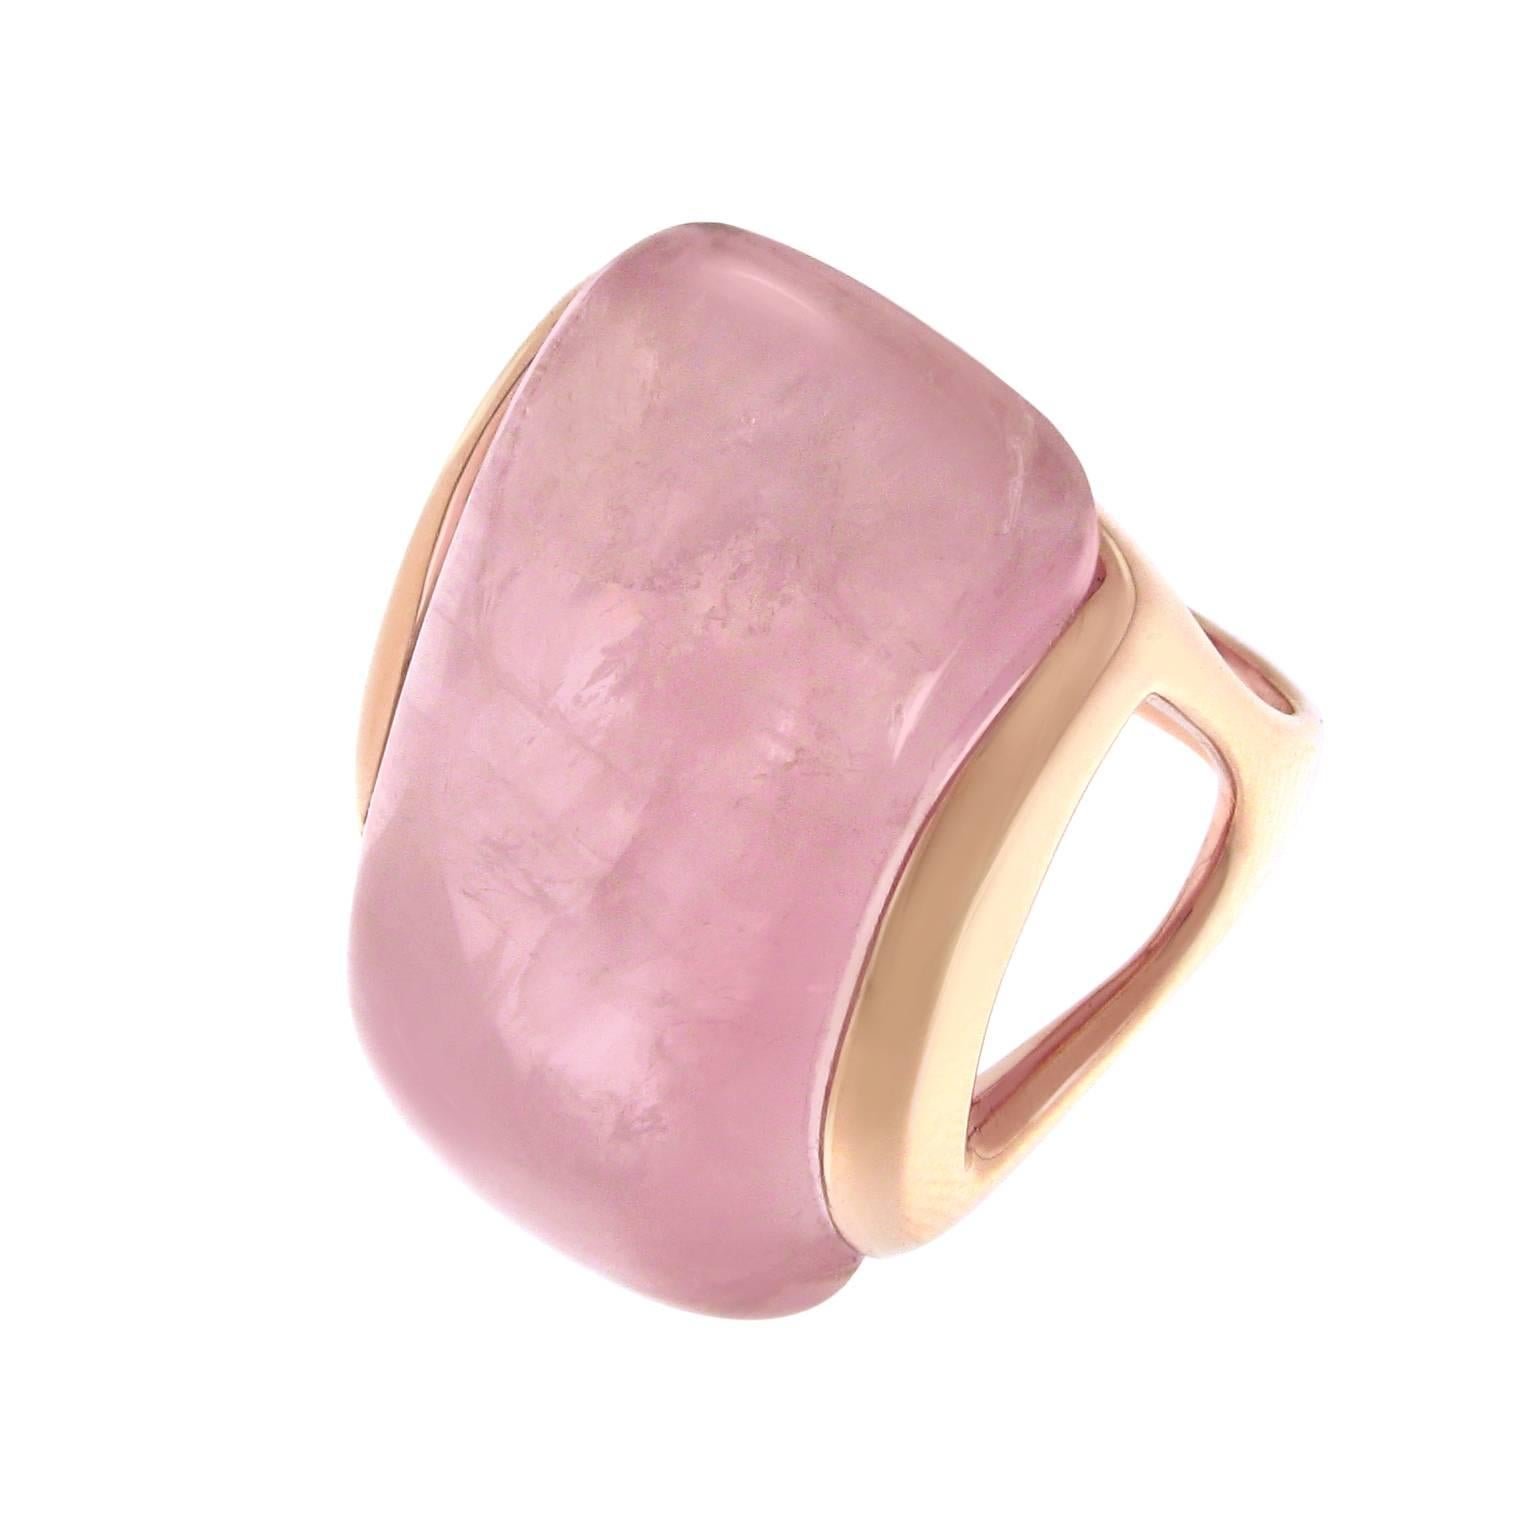 Timeless contemporary sculptured cocktail ring in 18k rose gold. The ring features a slim, ergonomical design and a custom cut candy-color pink quartz.
Ring size 6.5, EU 53.
Signed and hallmarked Gavello. 
The brand is known for its impeccable